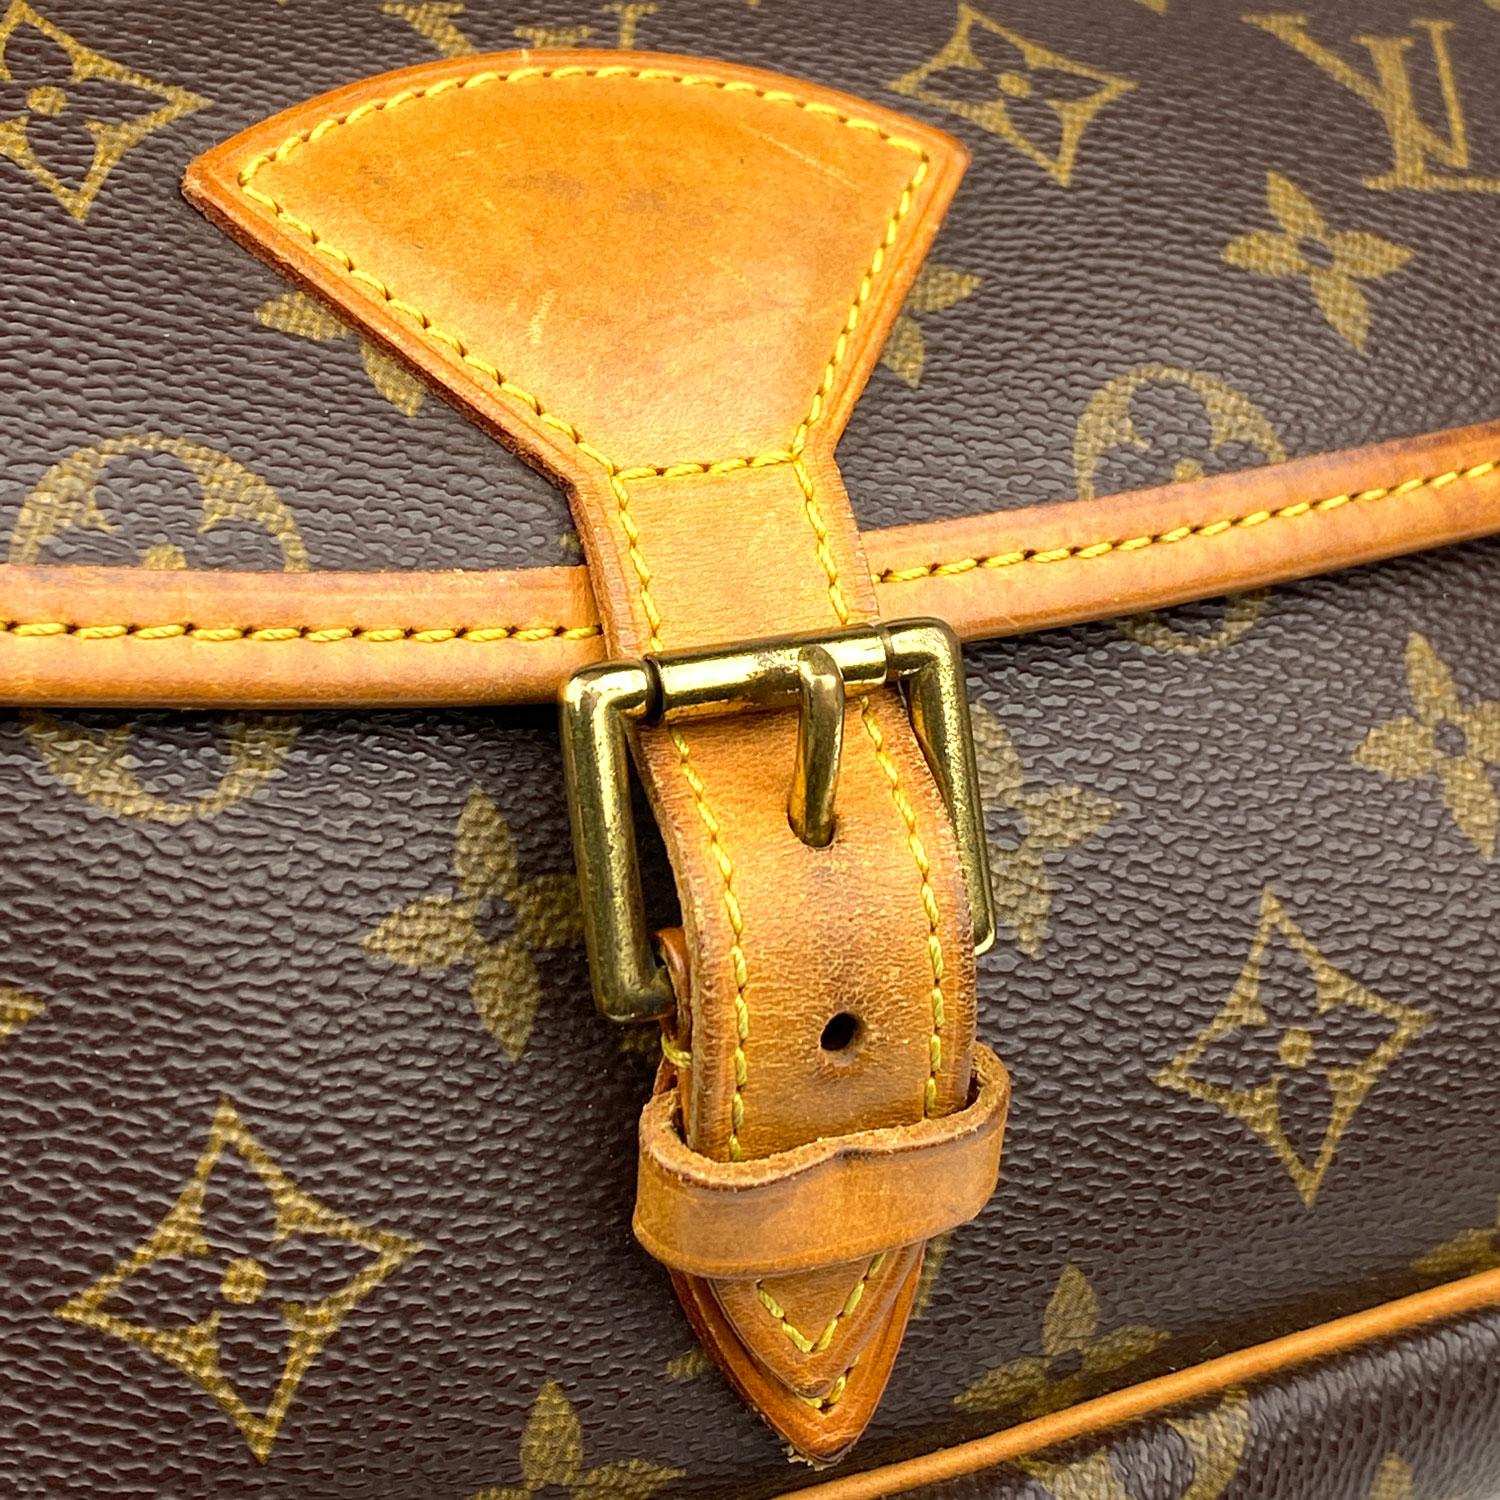 Louis Vuitton Monogram Sologne Crossbody bag In Good Condition For Sale In Sundbyberg, SE